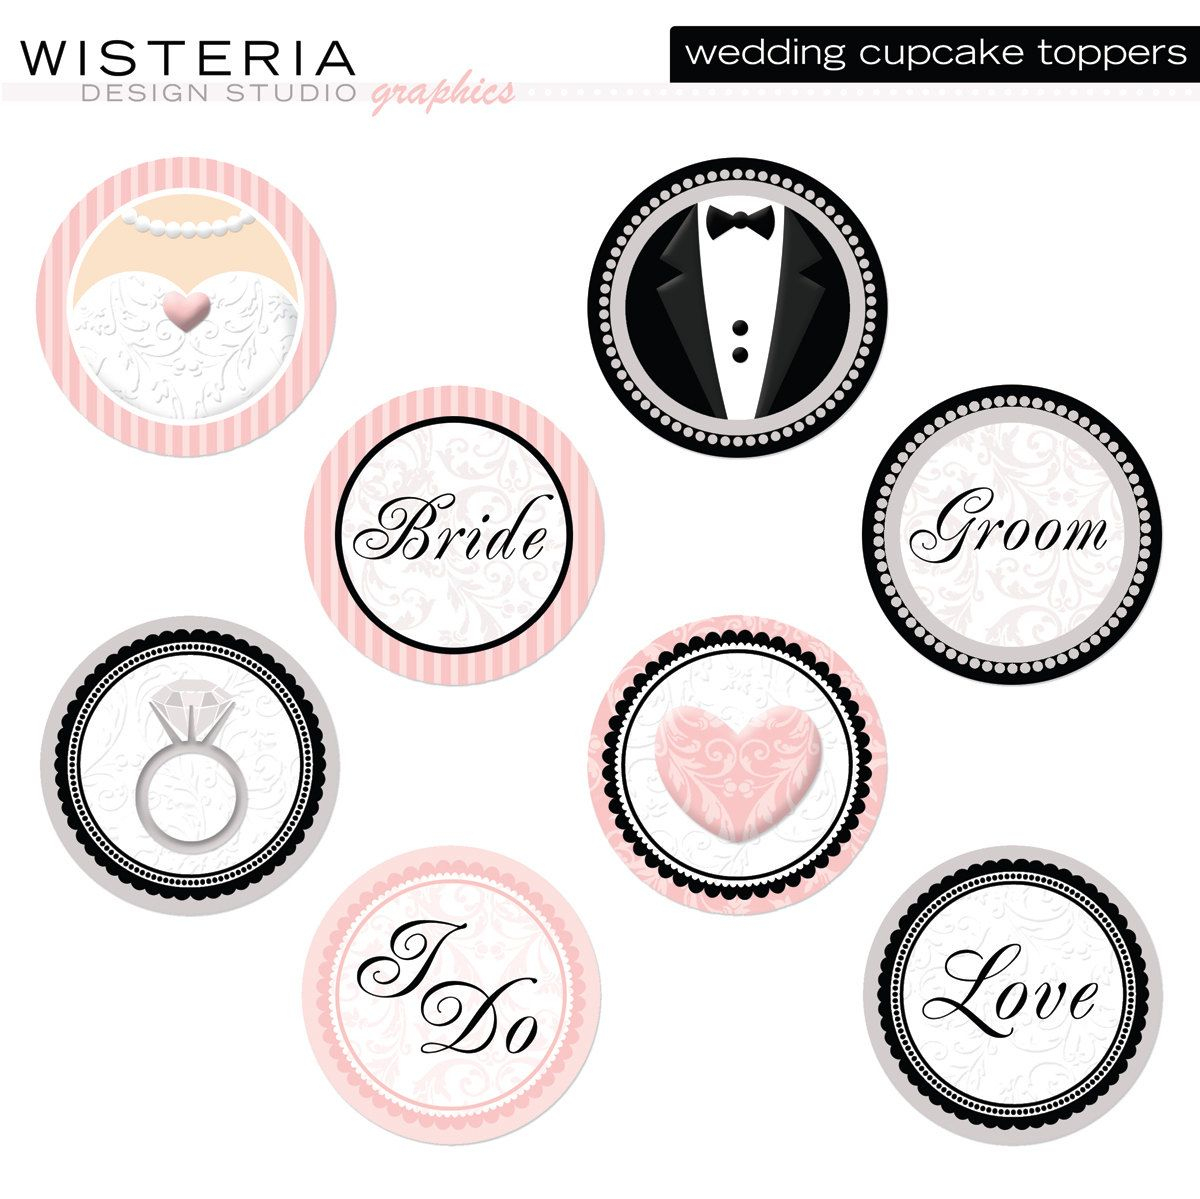 Wedding Cupcake Toppers - Diy Printables - Instant Download - Free Printable Whale Cupcake Toppers